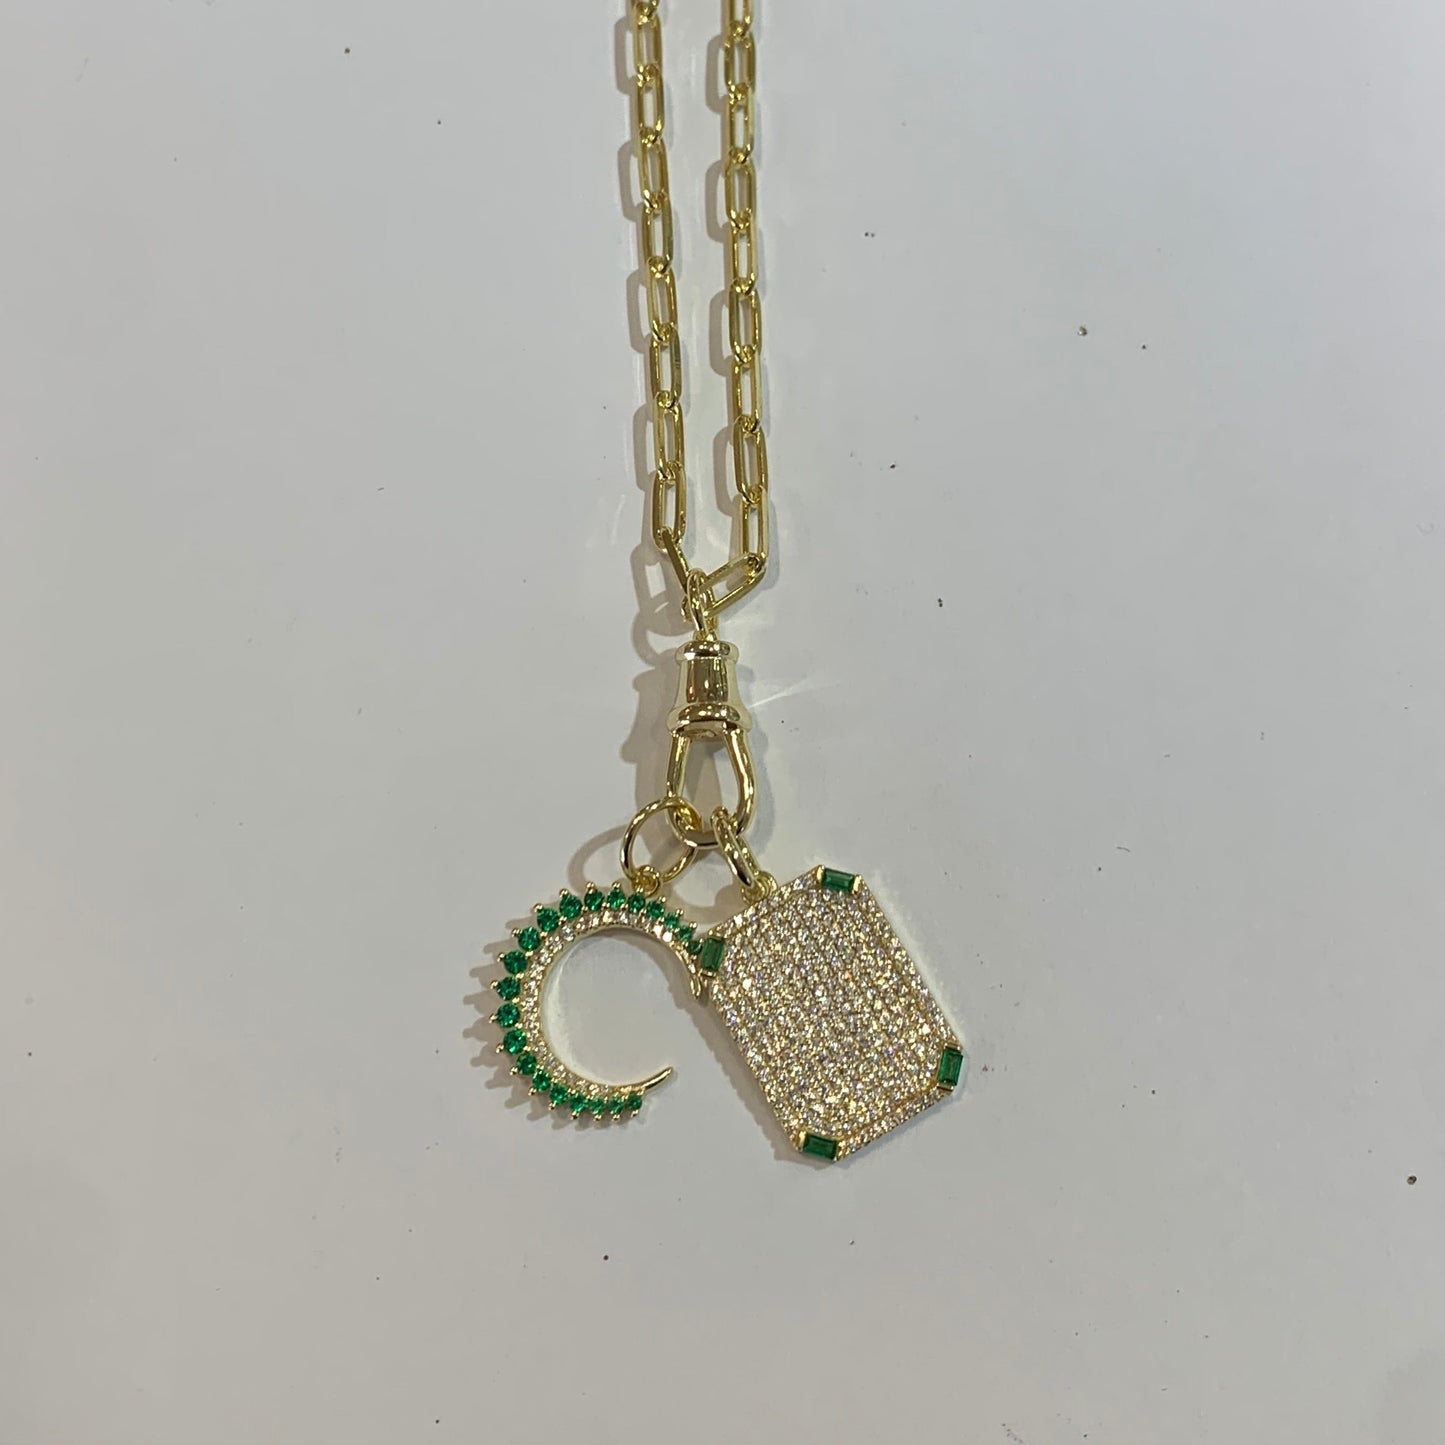 VERMEIL MOON/DOGTAG CHARM NECKLACE WITH EMERALD COLORED STONE